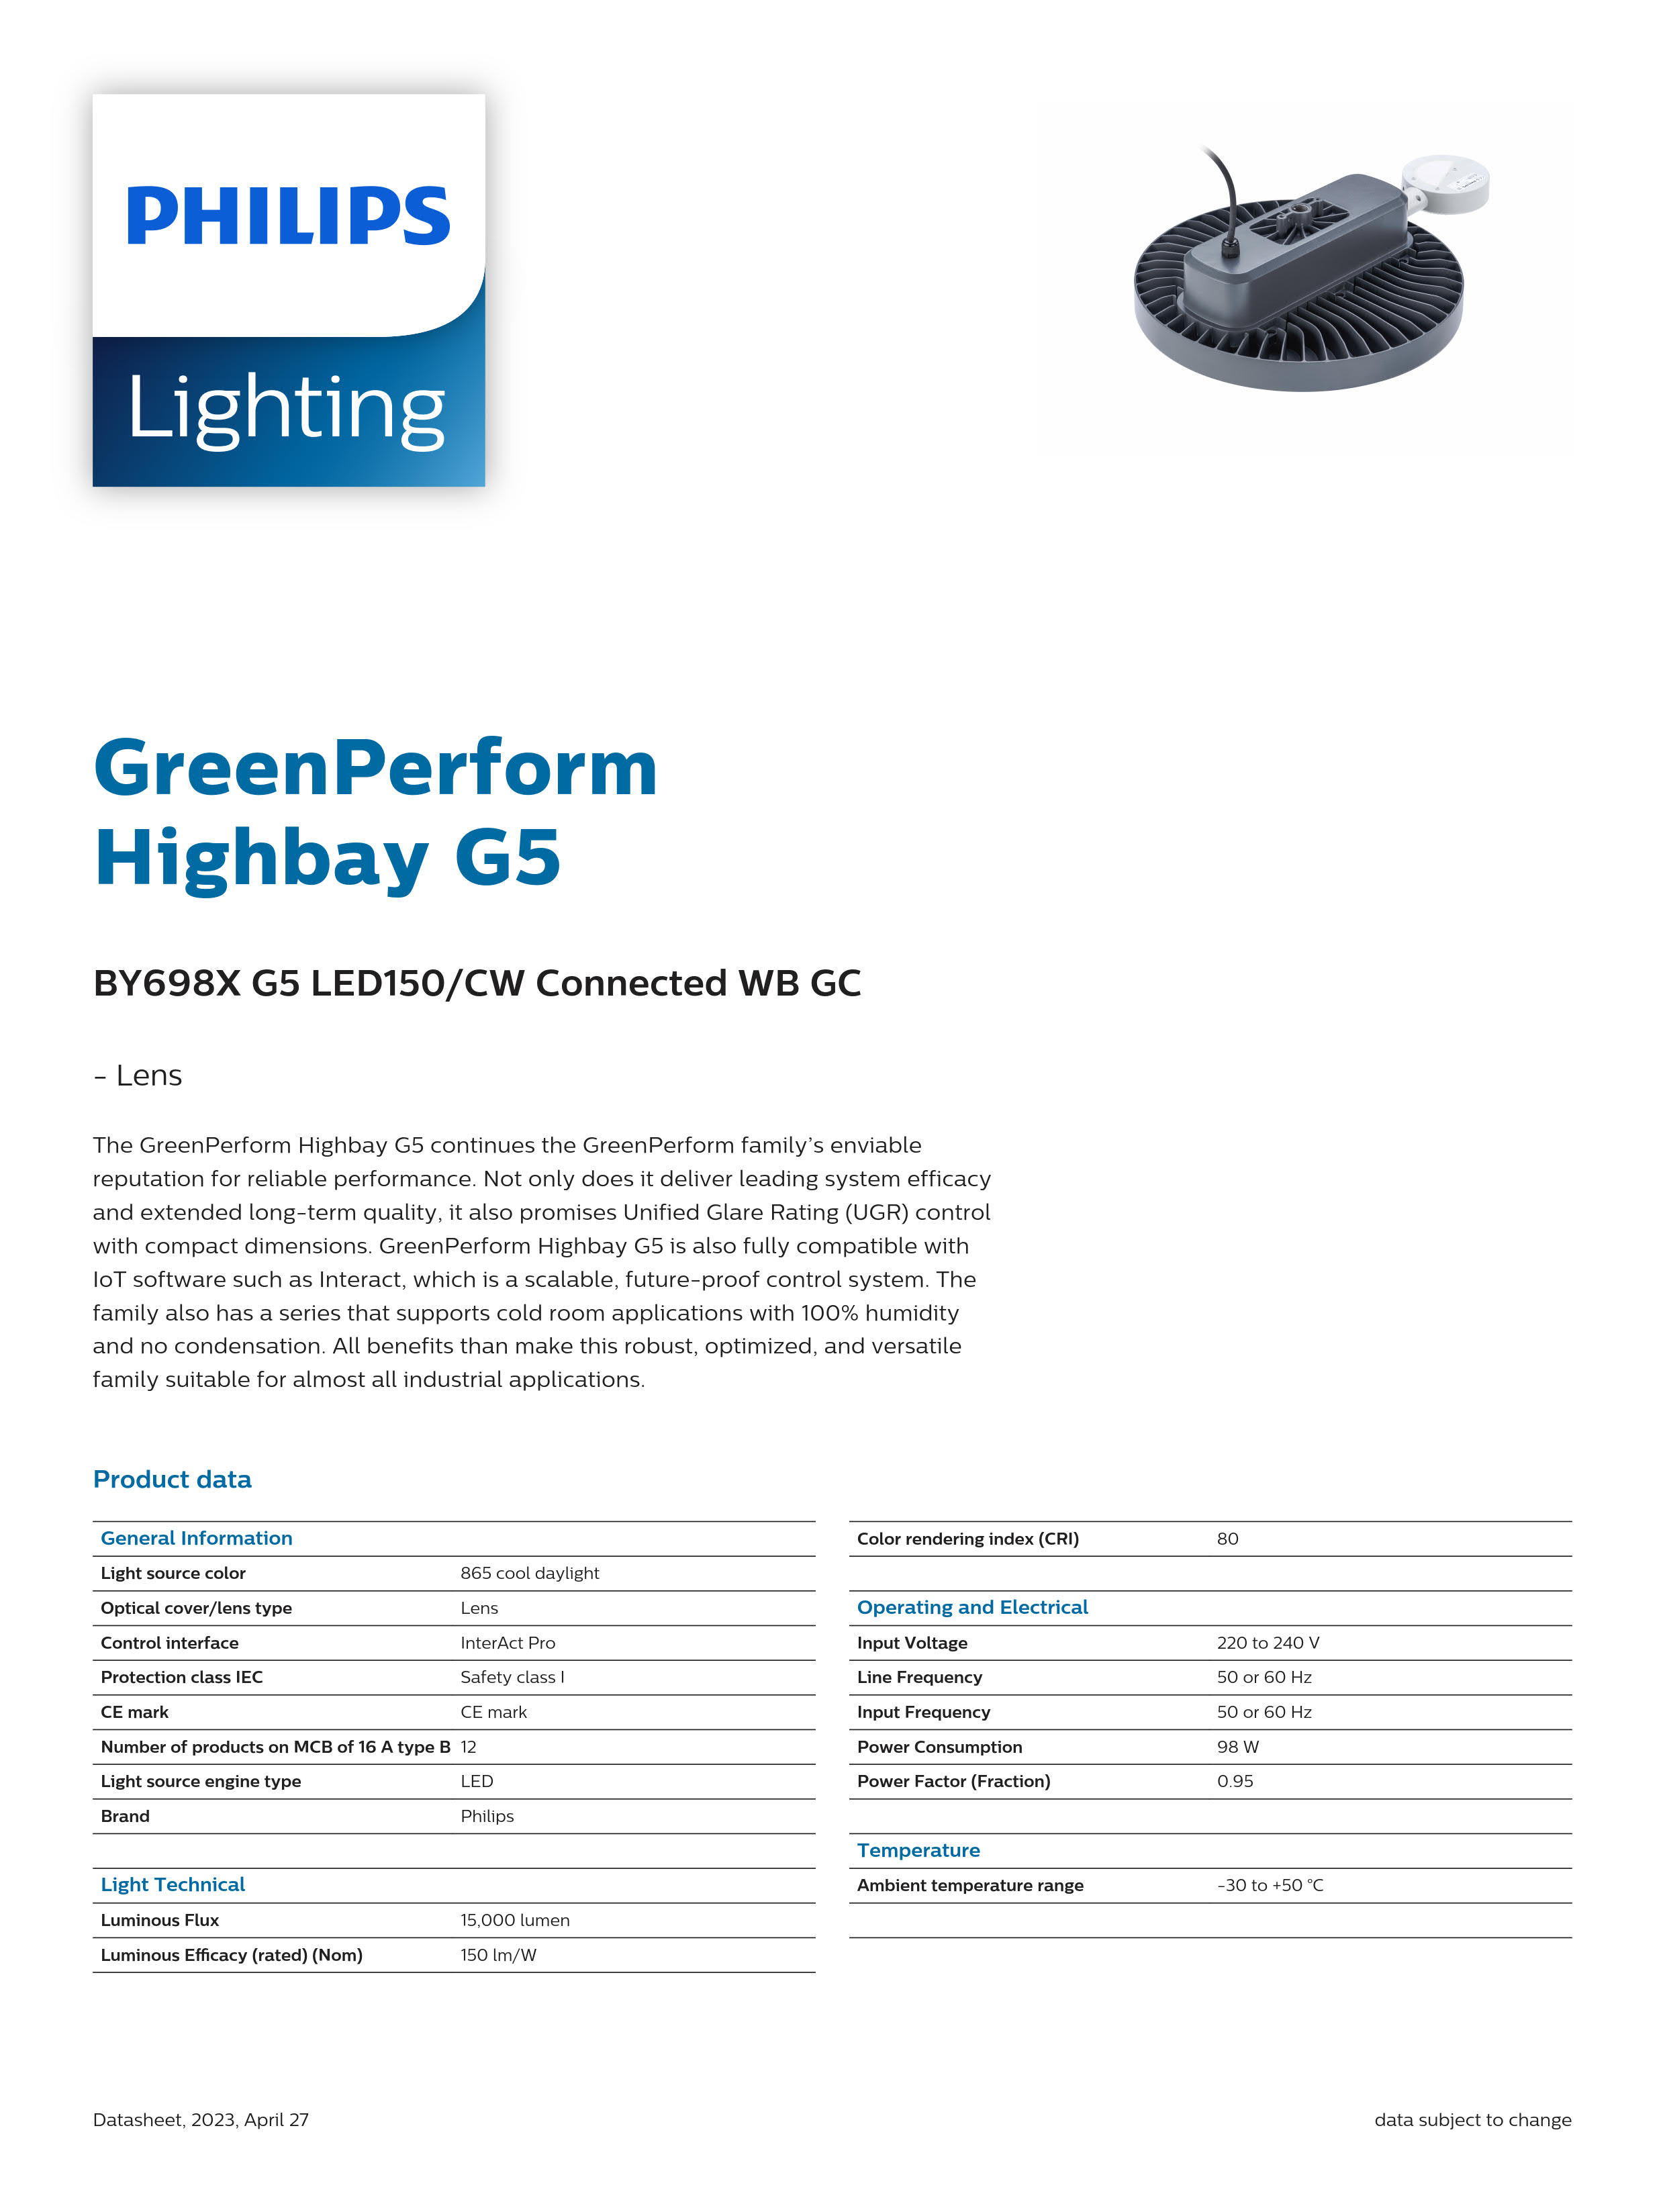 PHILIPS Highbay BY698X G5 LED150/CW Connected WB GC 911401524191